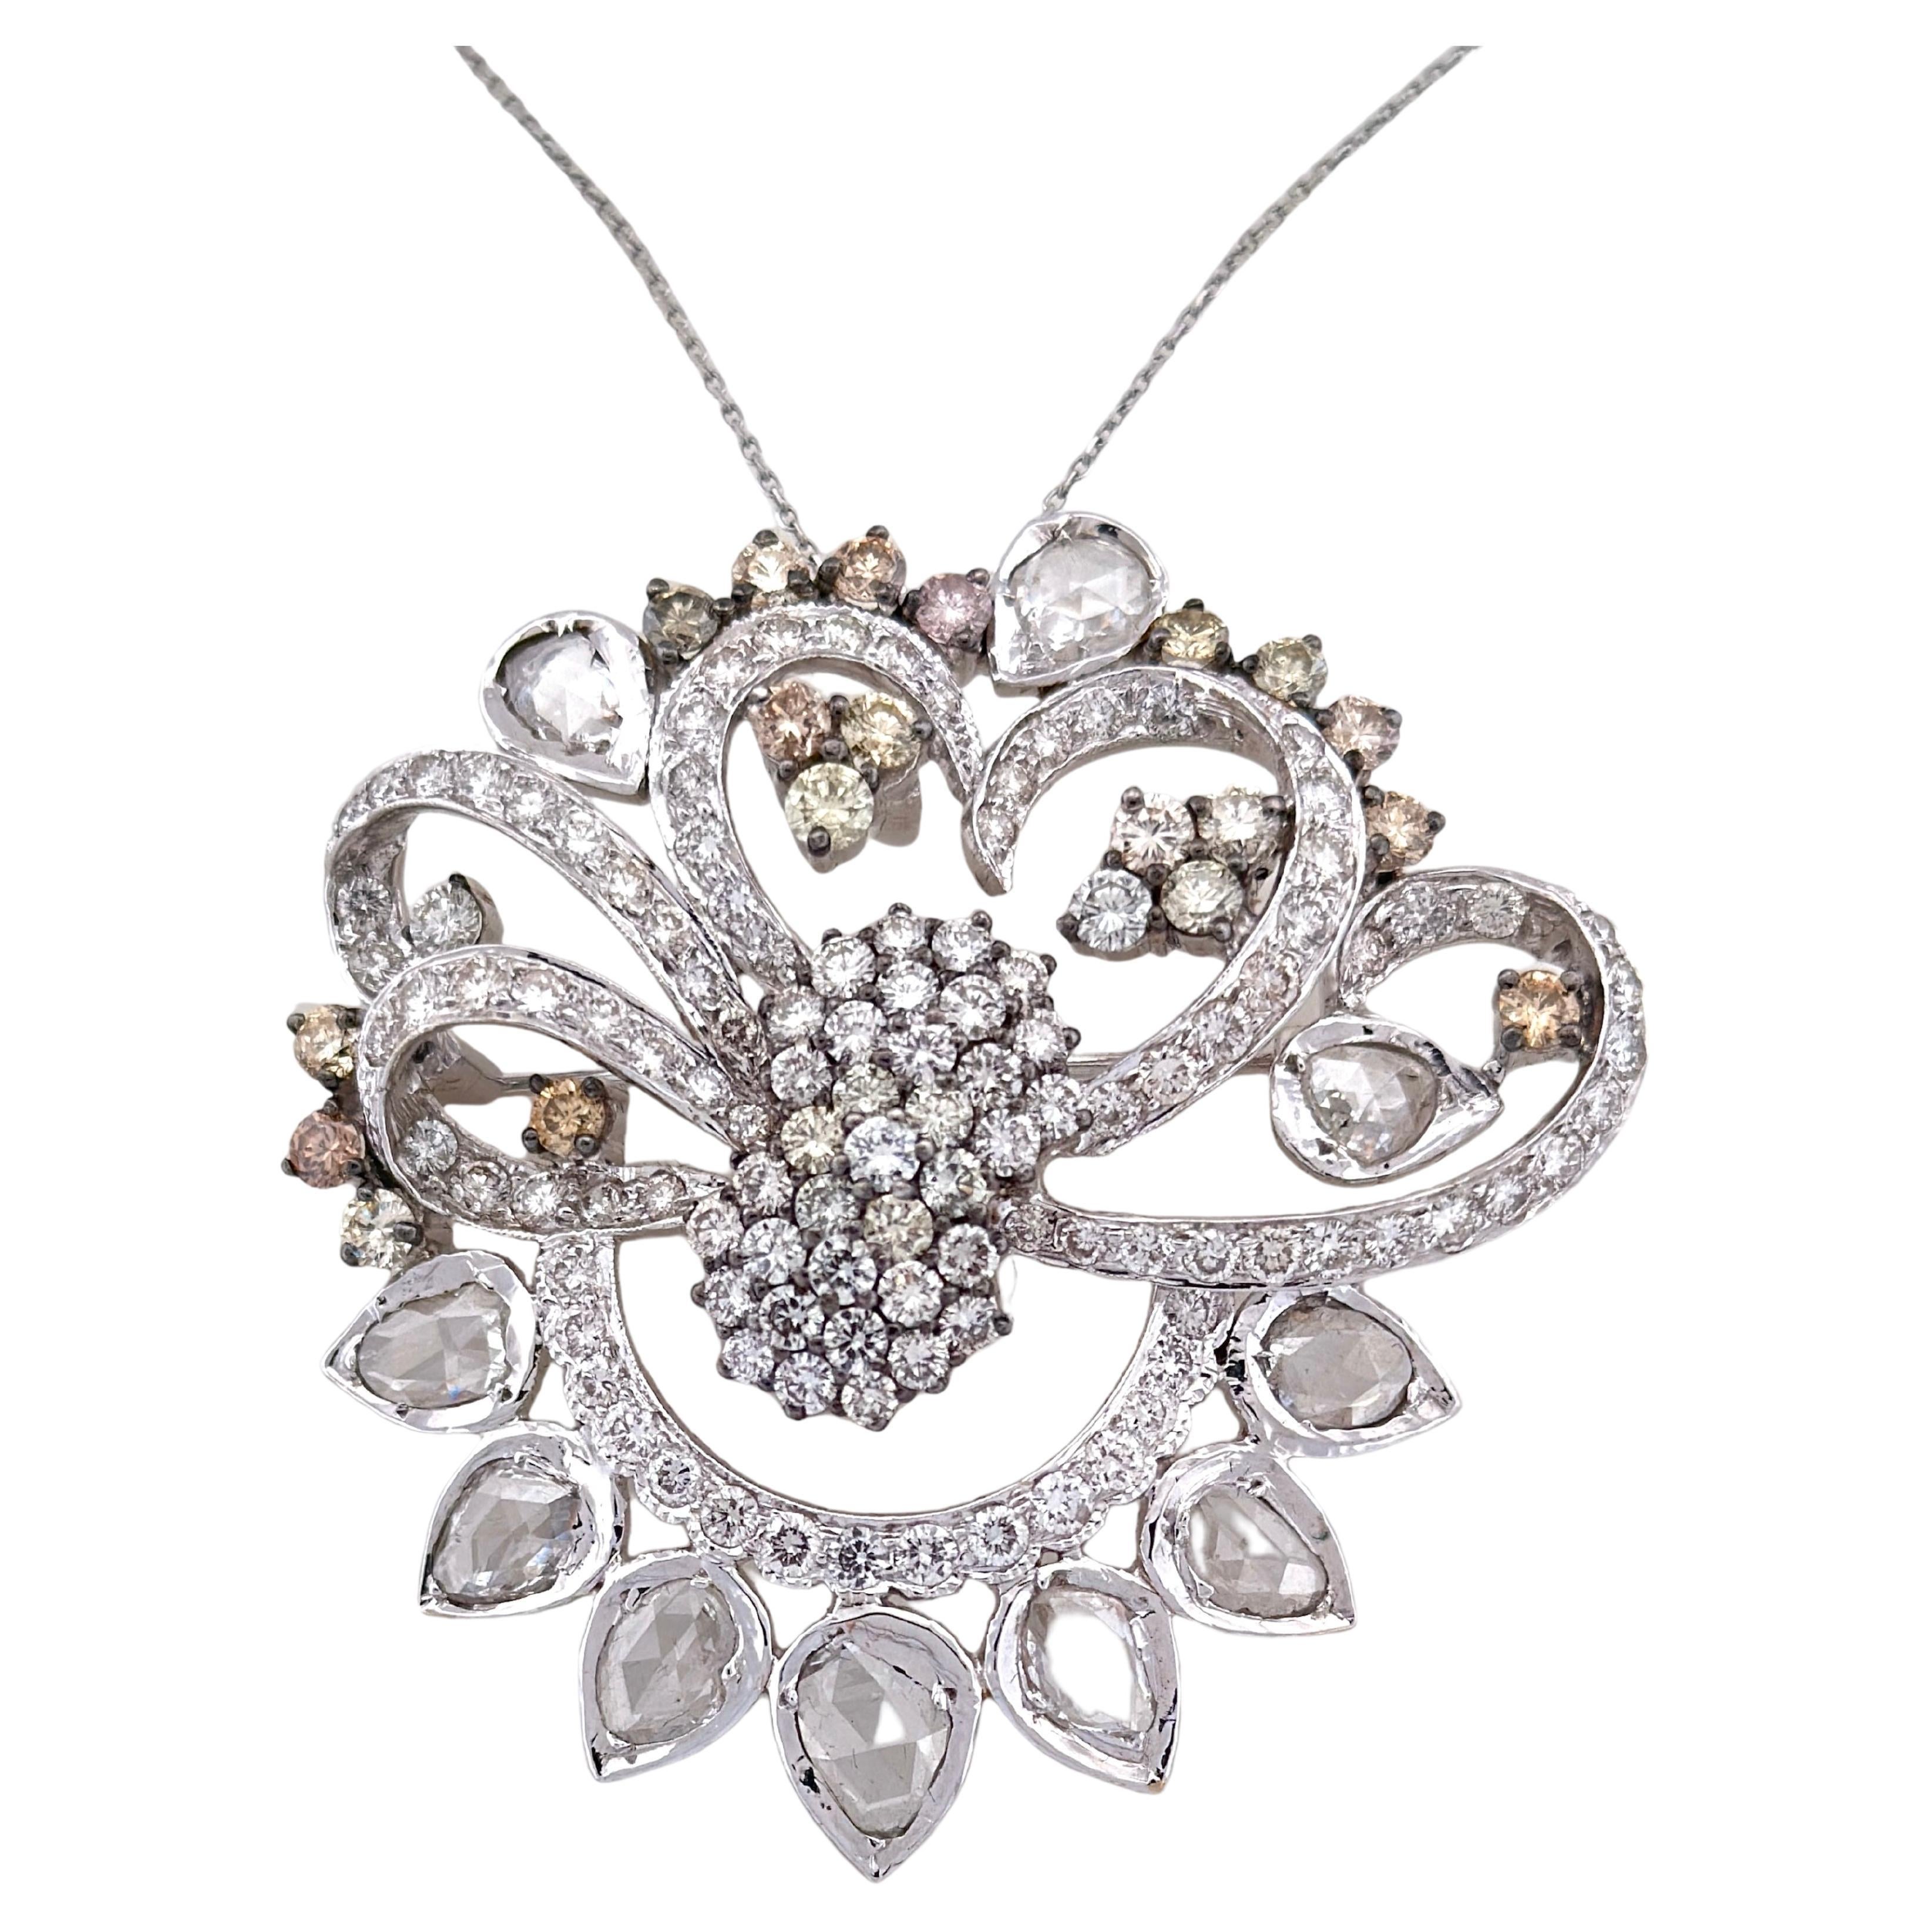 Unique Whited Diamond Pendant And Brooch